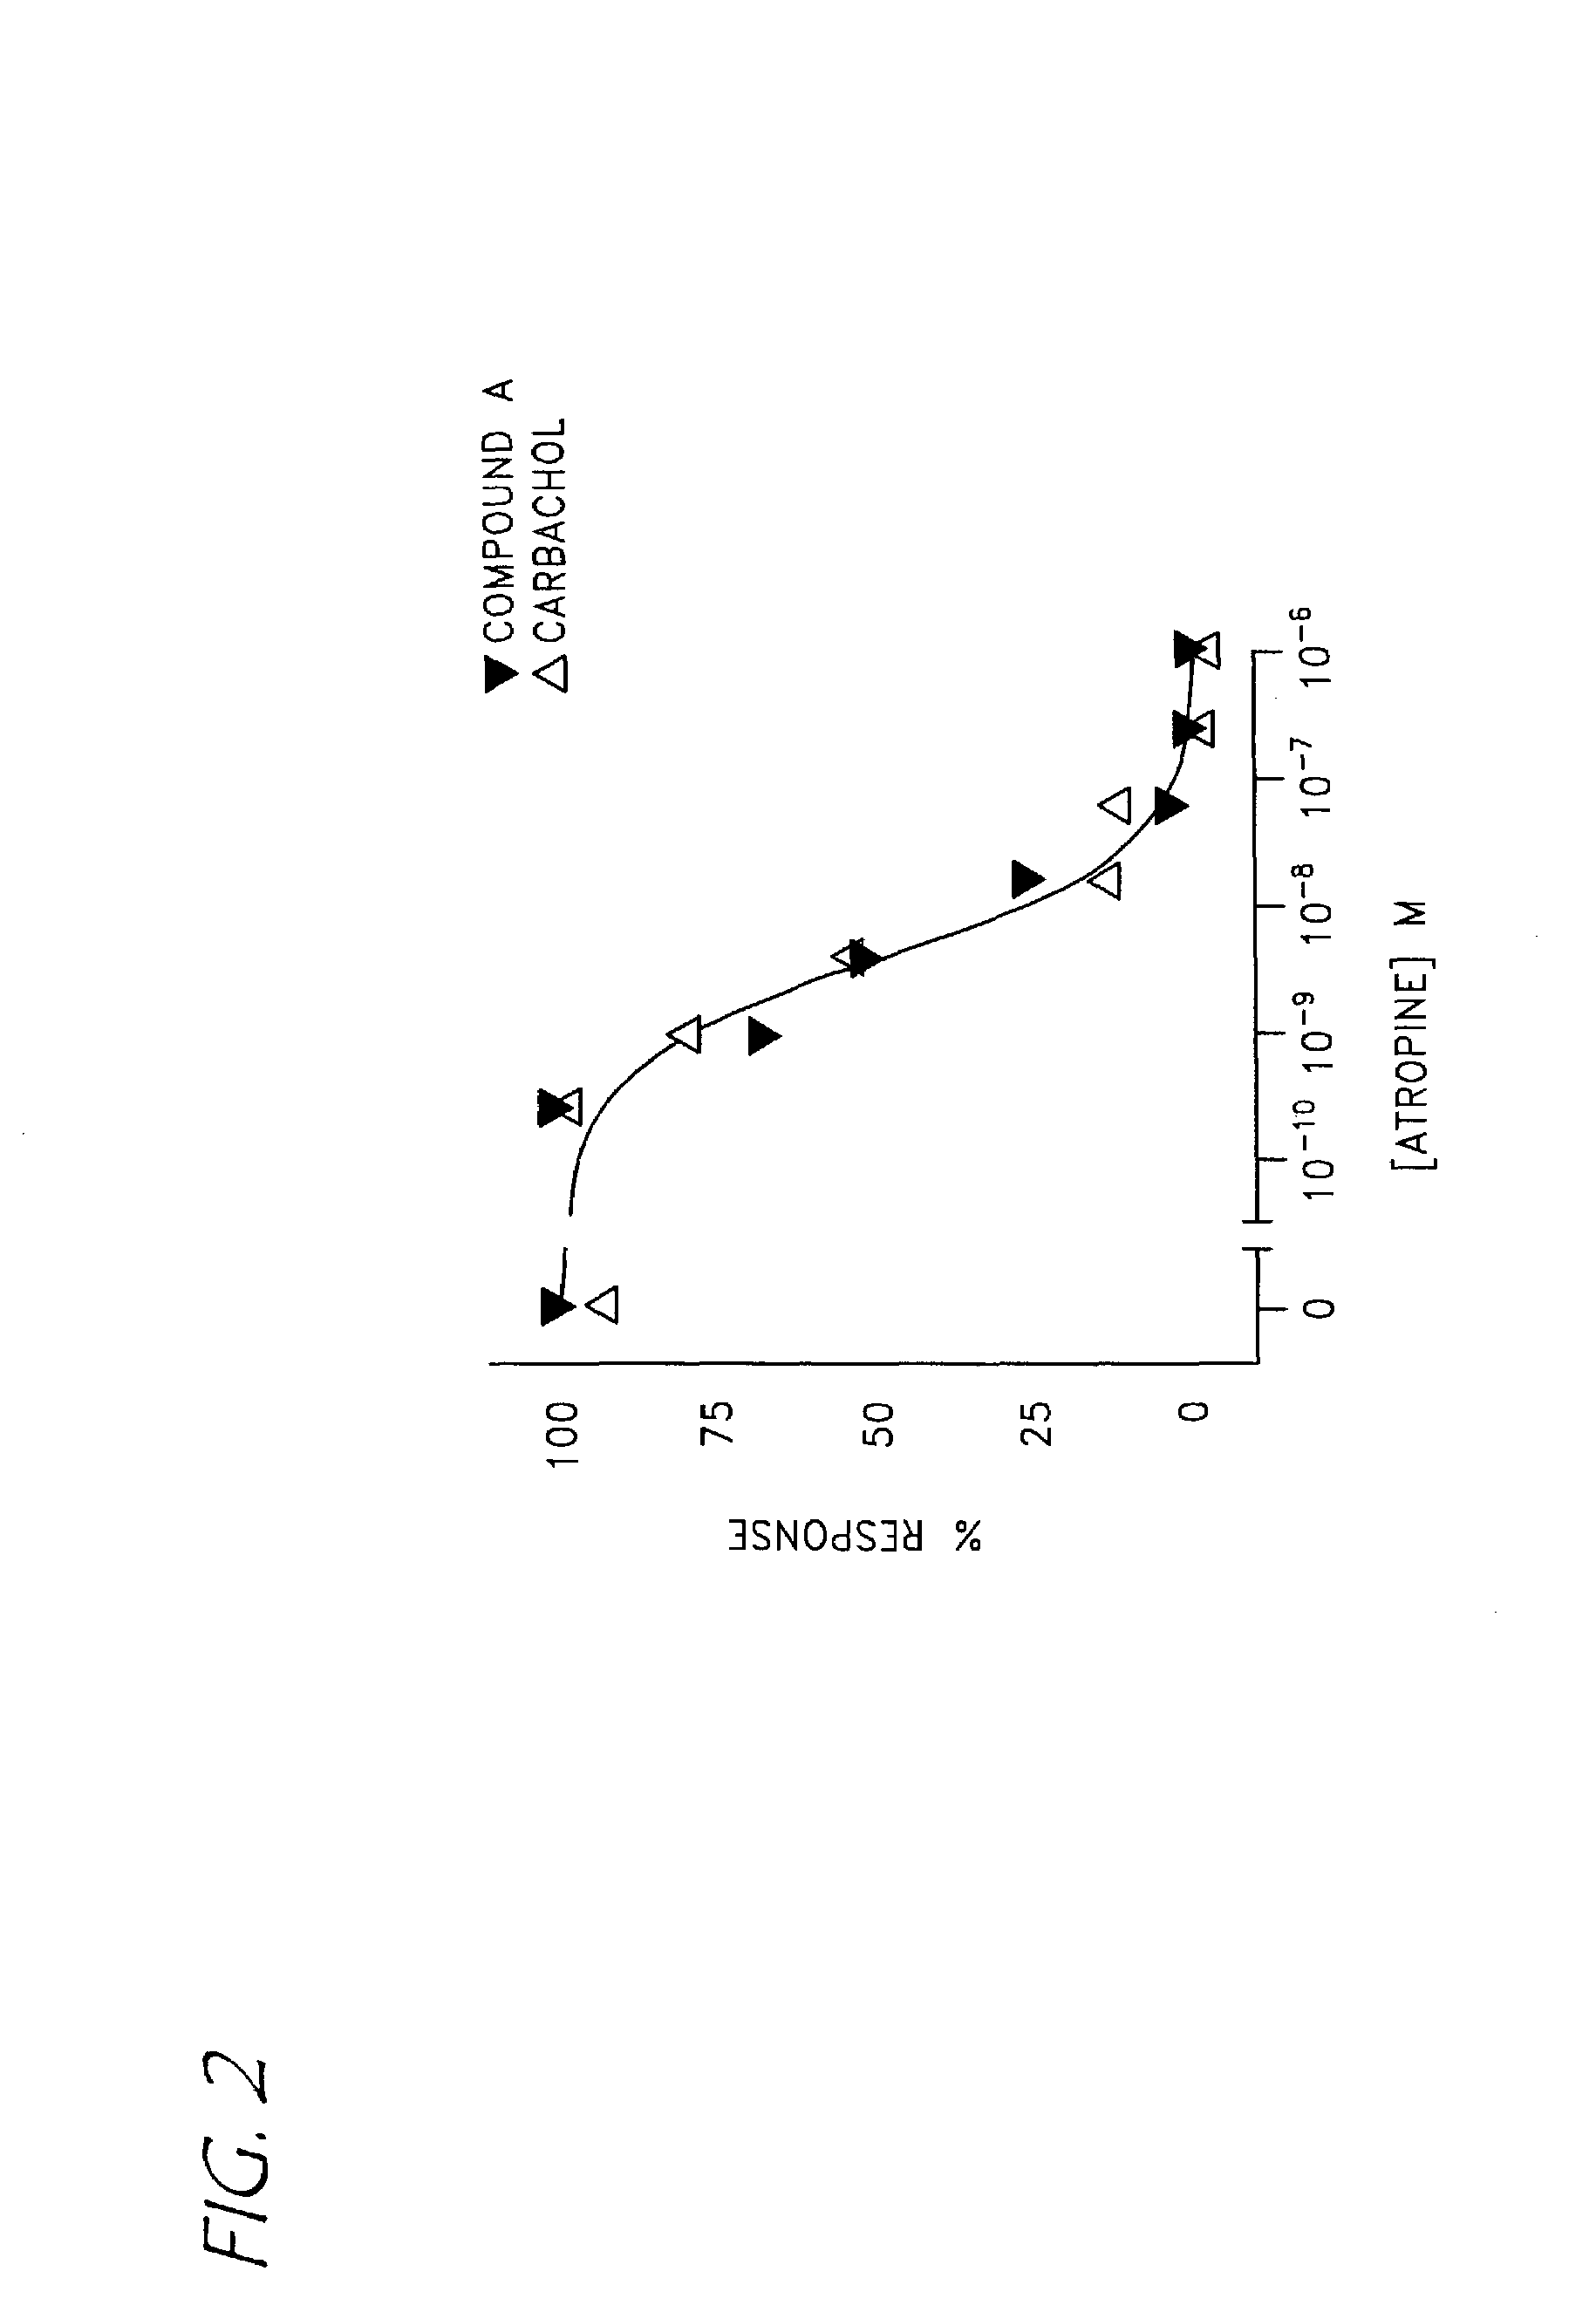 Compounds with activity on muscarinic receptors